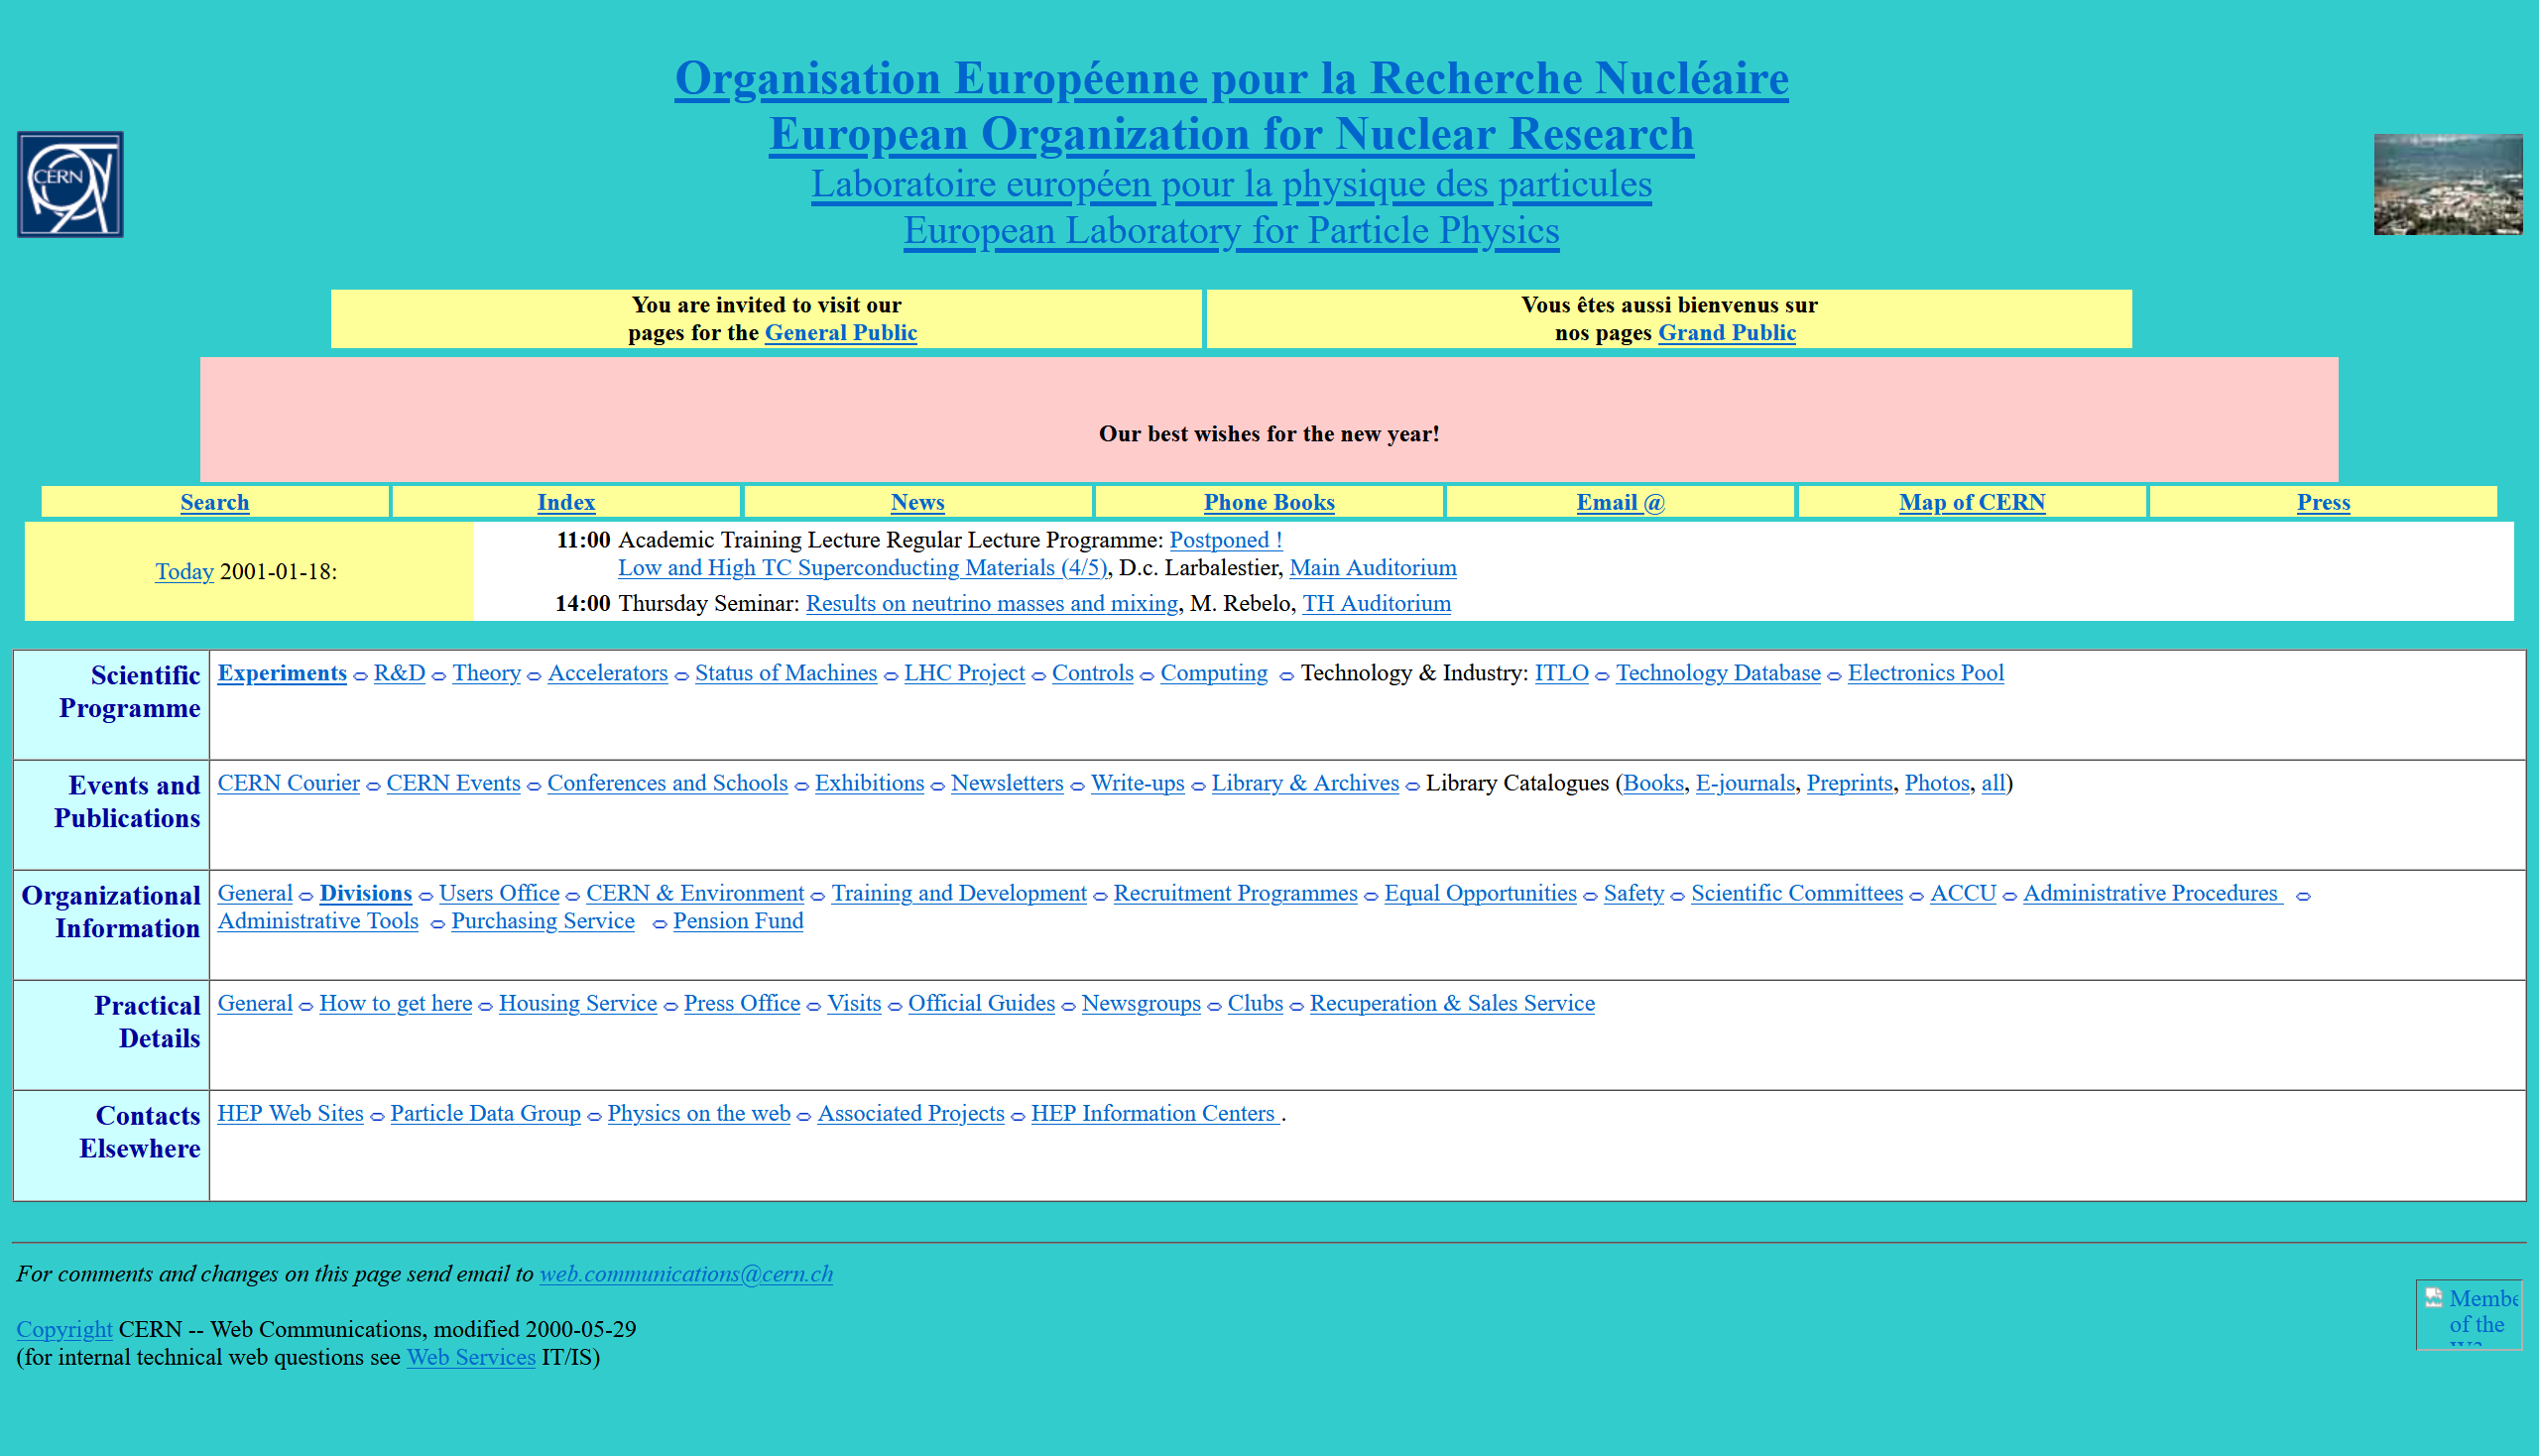 screenshot of CERN's homepage from 2001. It has a table of content in various colors, typical of early web design